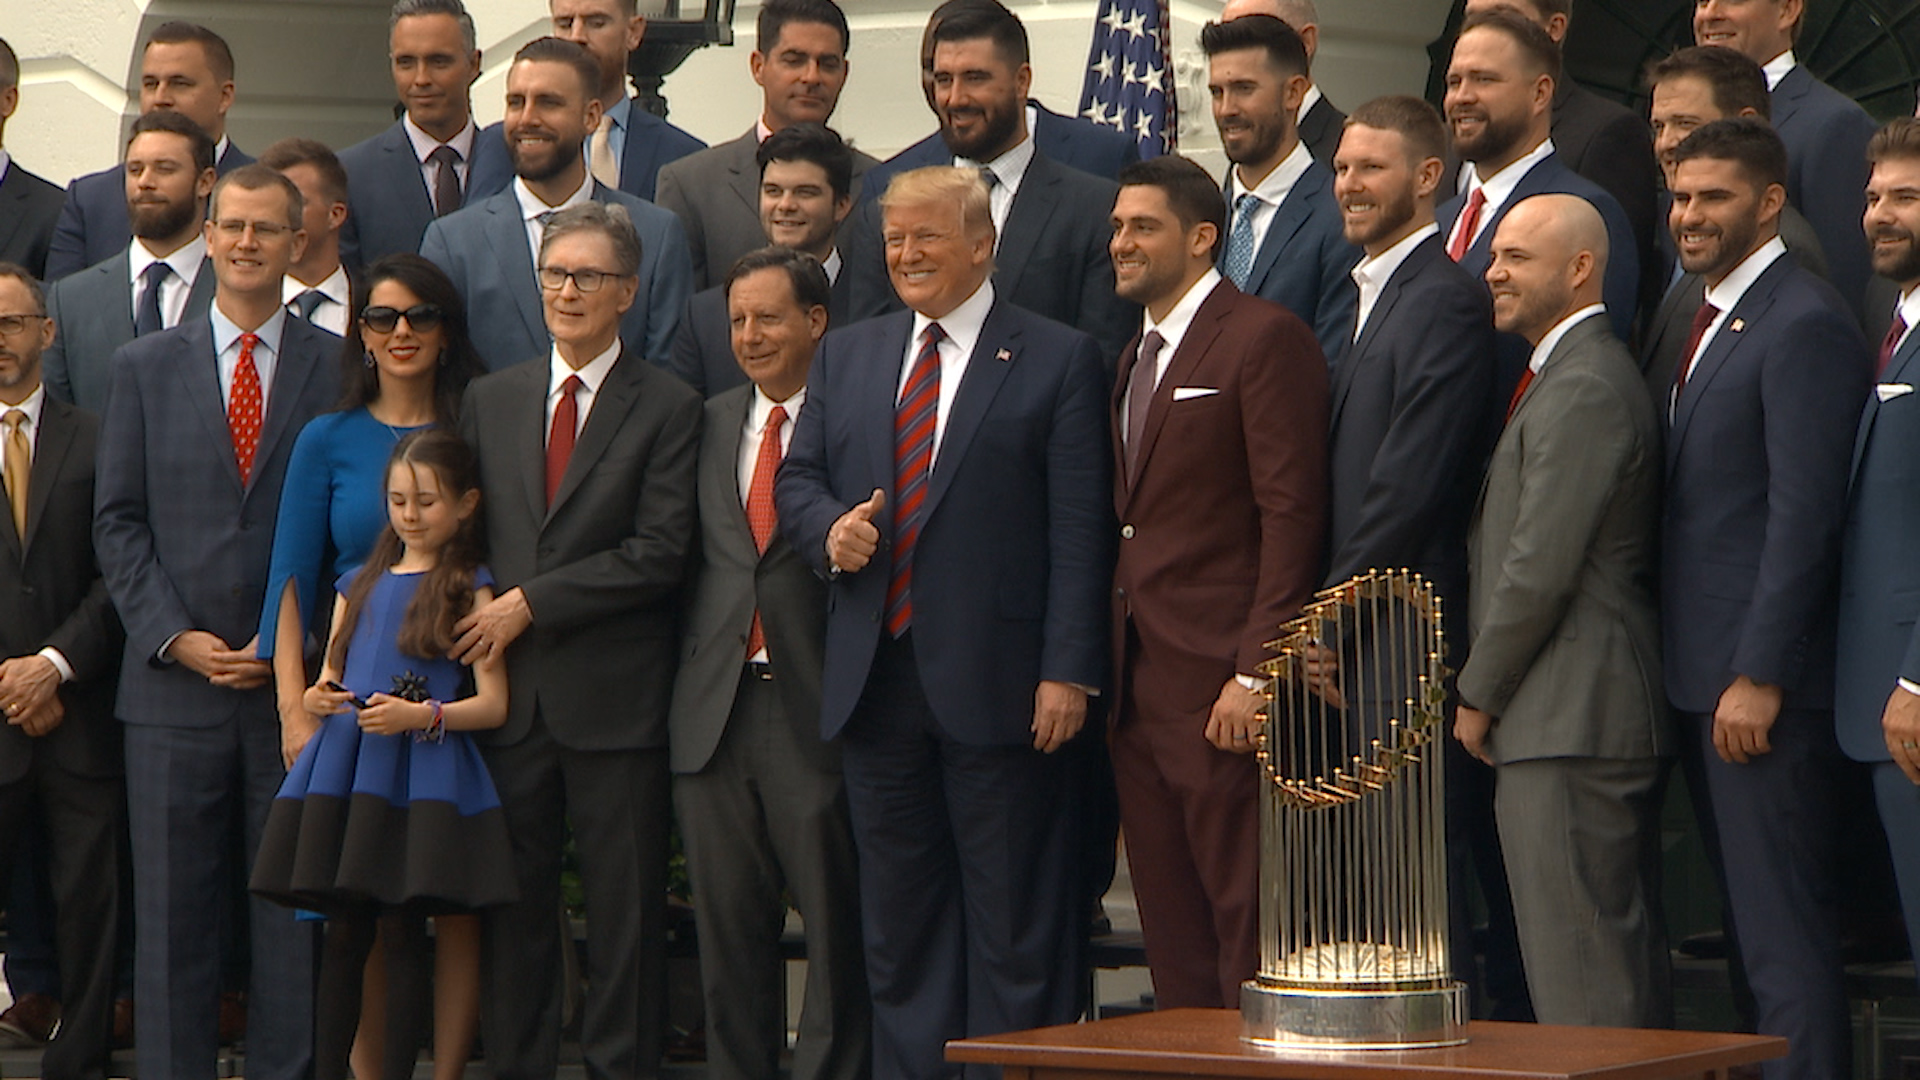 United as baseball champions, Boston Red Sox are divided by Trump